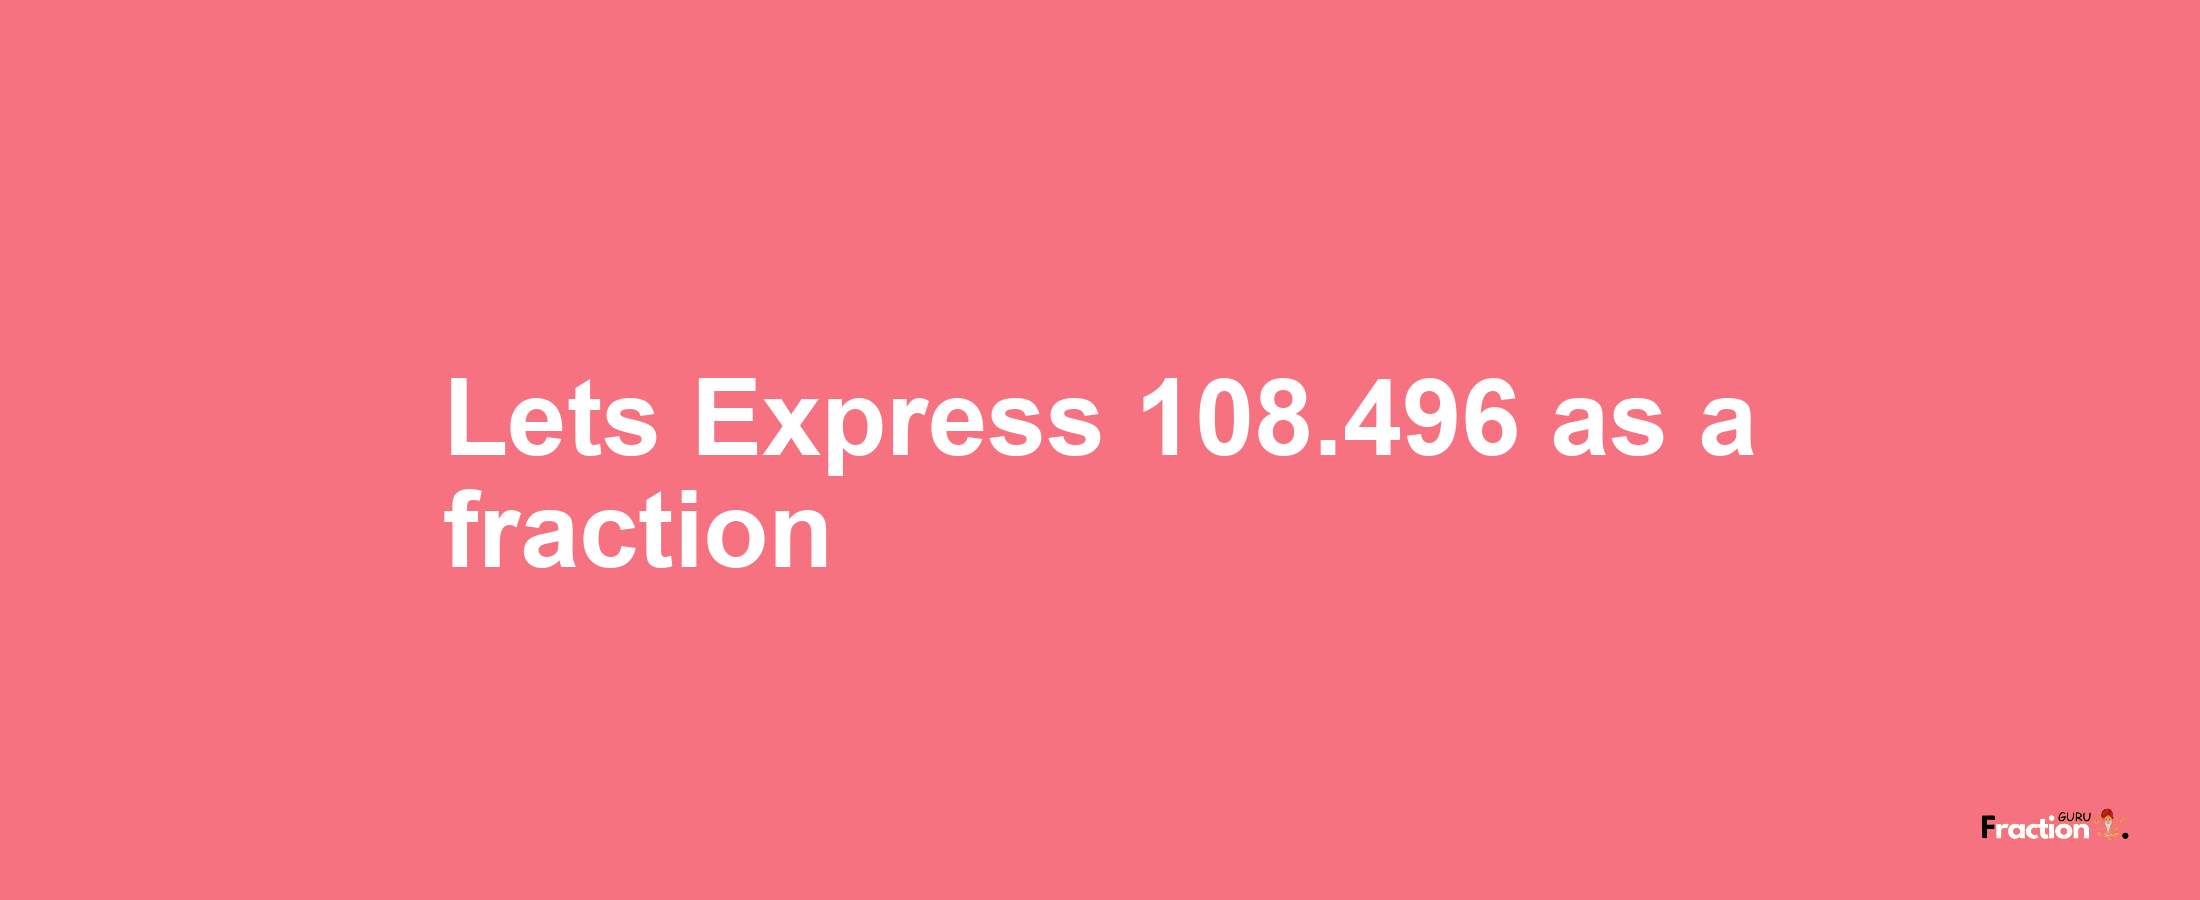 Lets Express 108.496 as afraction